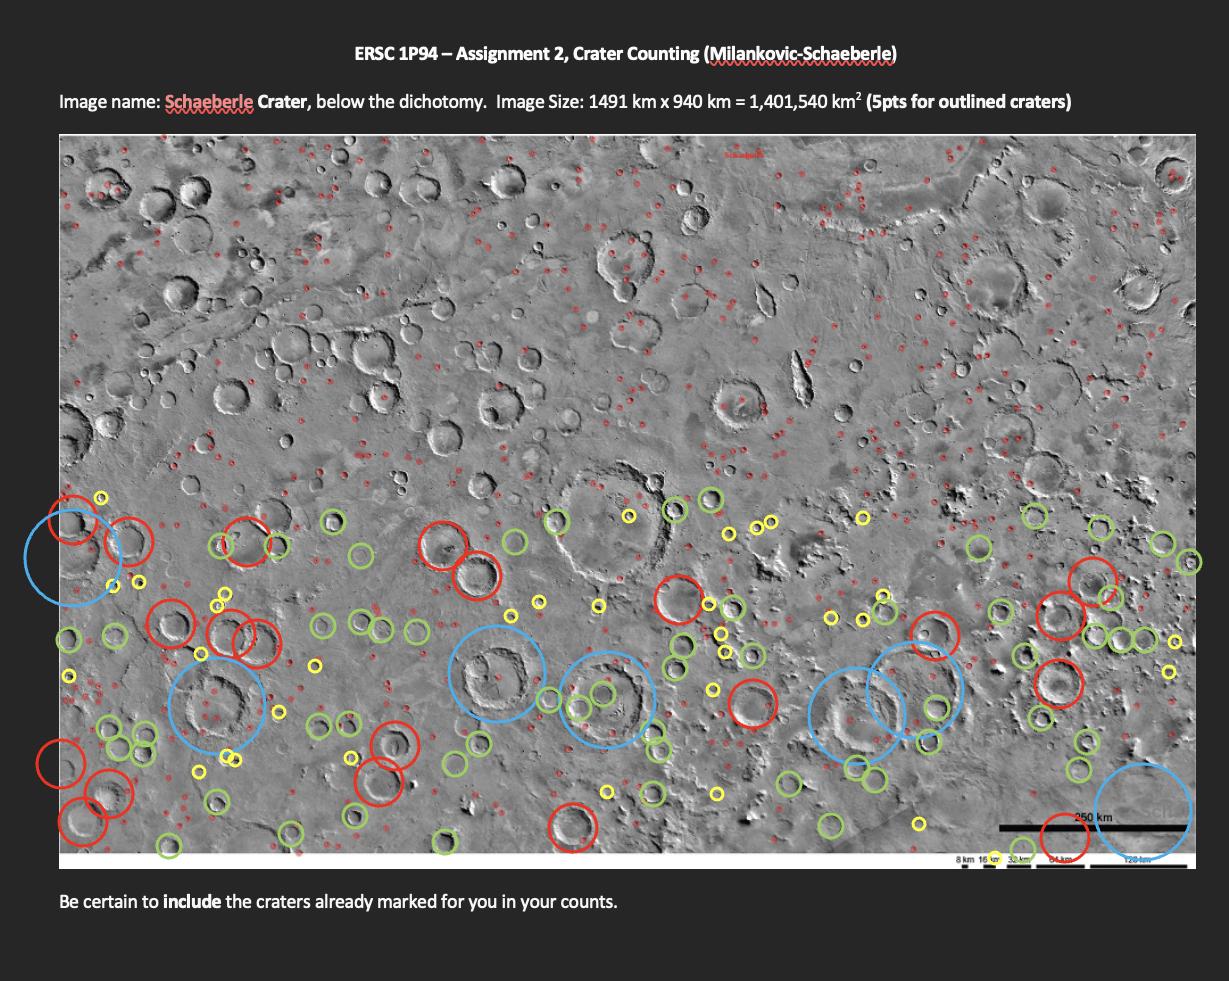 ERSC 1P94 - Assignment 2, Crater Counting (Milankovic-Schaeberle) Image name: Schaeberle Crater, below the